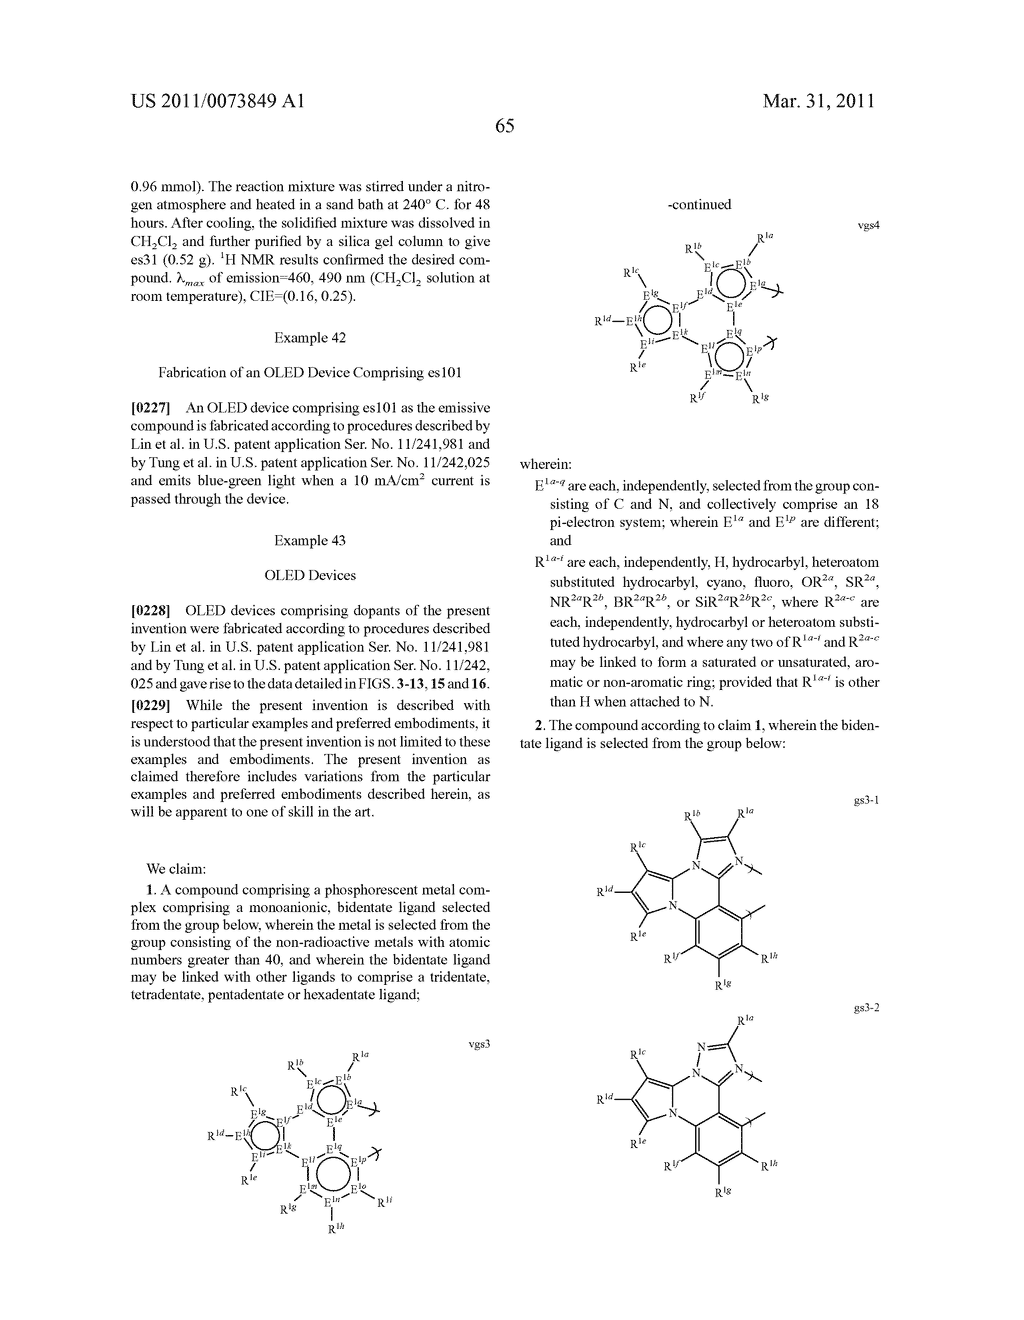 METAL COMPLEXES OF CYCLOMETALLATED IMIDAZO[1,2-f ]PHENANTHRIDINE AND DIIMIDAZO[1,2-a:1',2'-c ]QUNIAZOLINE LIGANDS AND ISOELECTRONIC AND BENZANNULATED ANALOGS THEREOF - diagram, schematic, and image 81